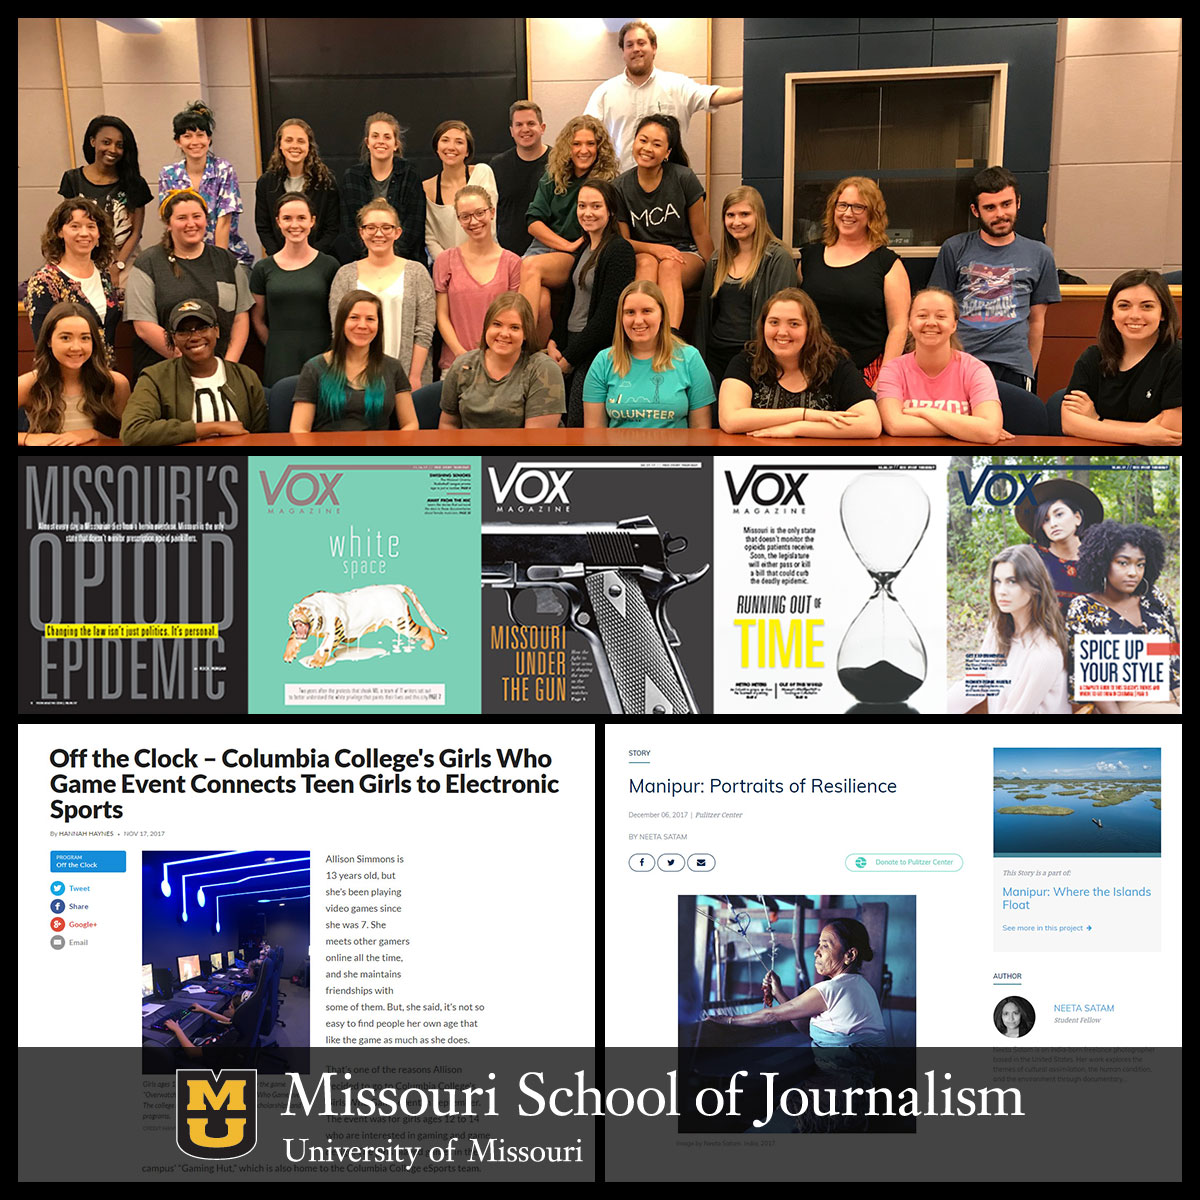 Society of Professional Journalists 2018 Mark of Excellence Awards